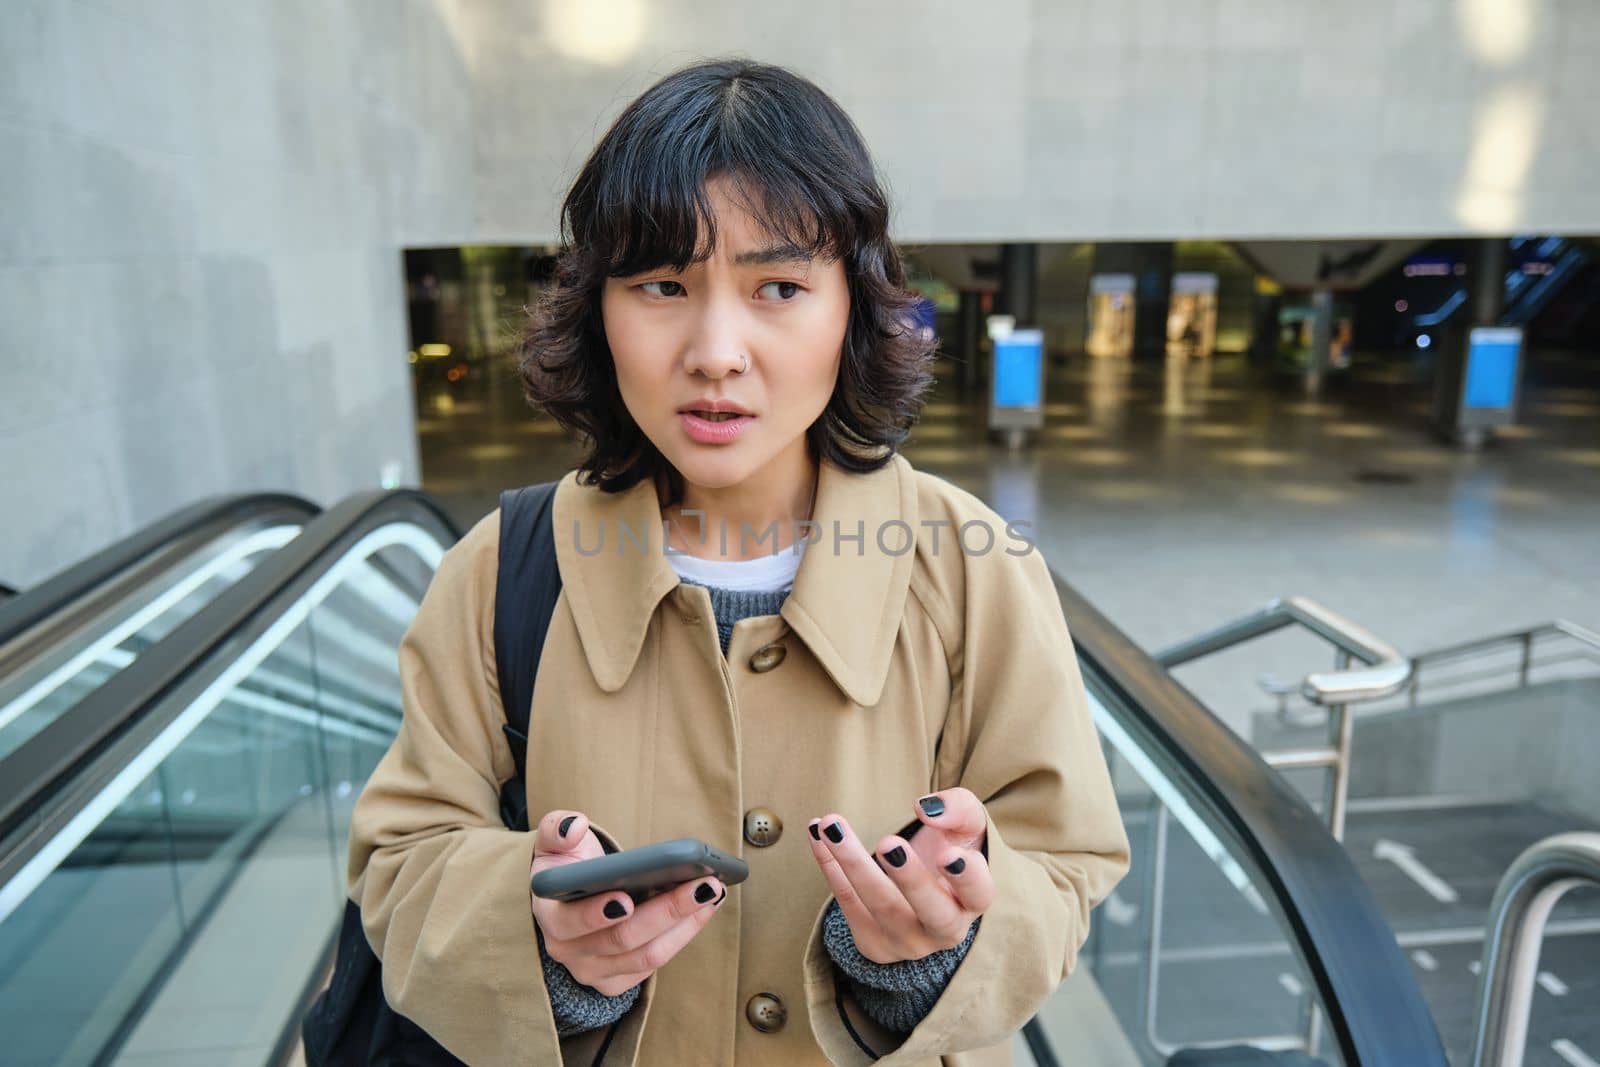 People in city. Portrait of korean girl standing on escalator, looks confused after reading text message on mobile phone.